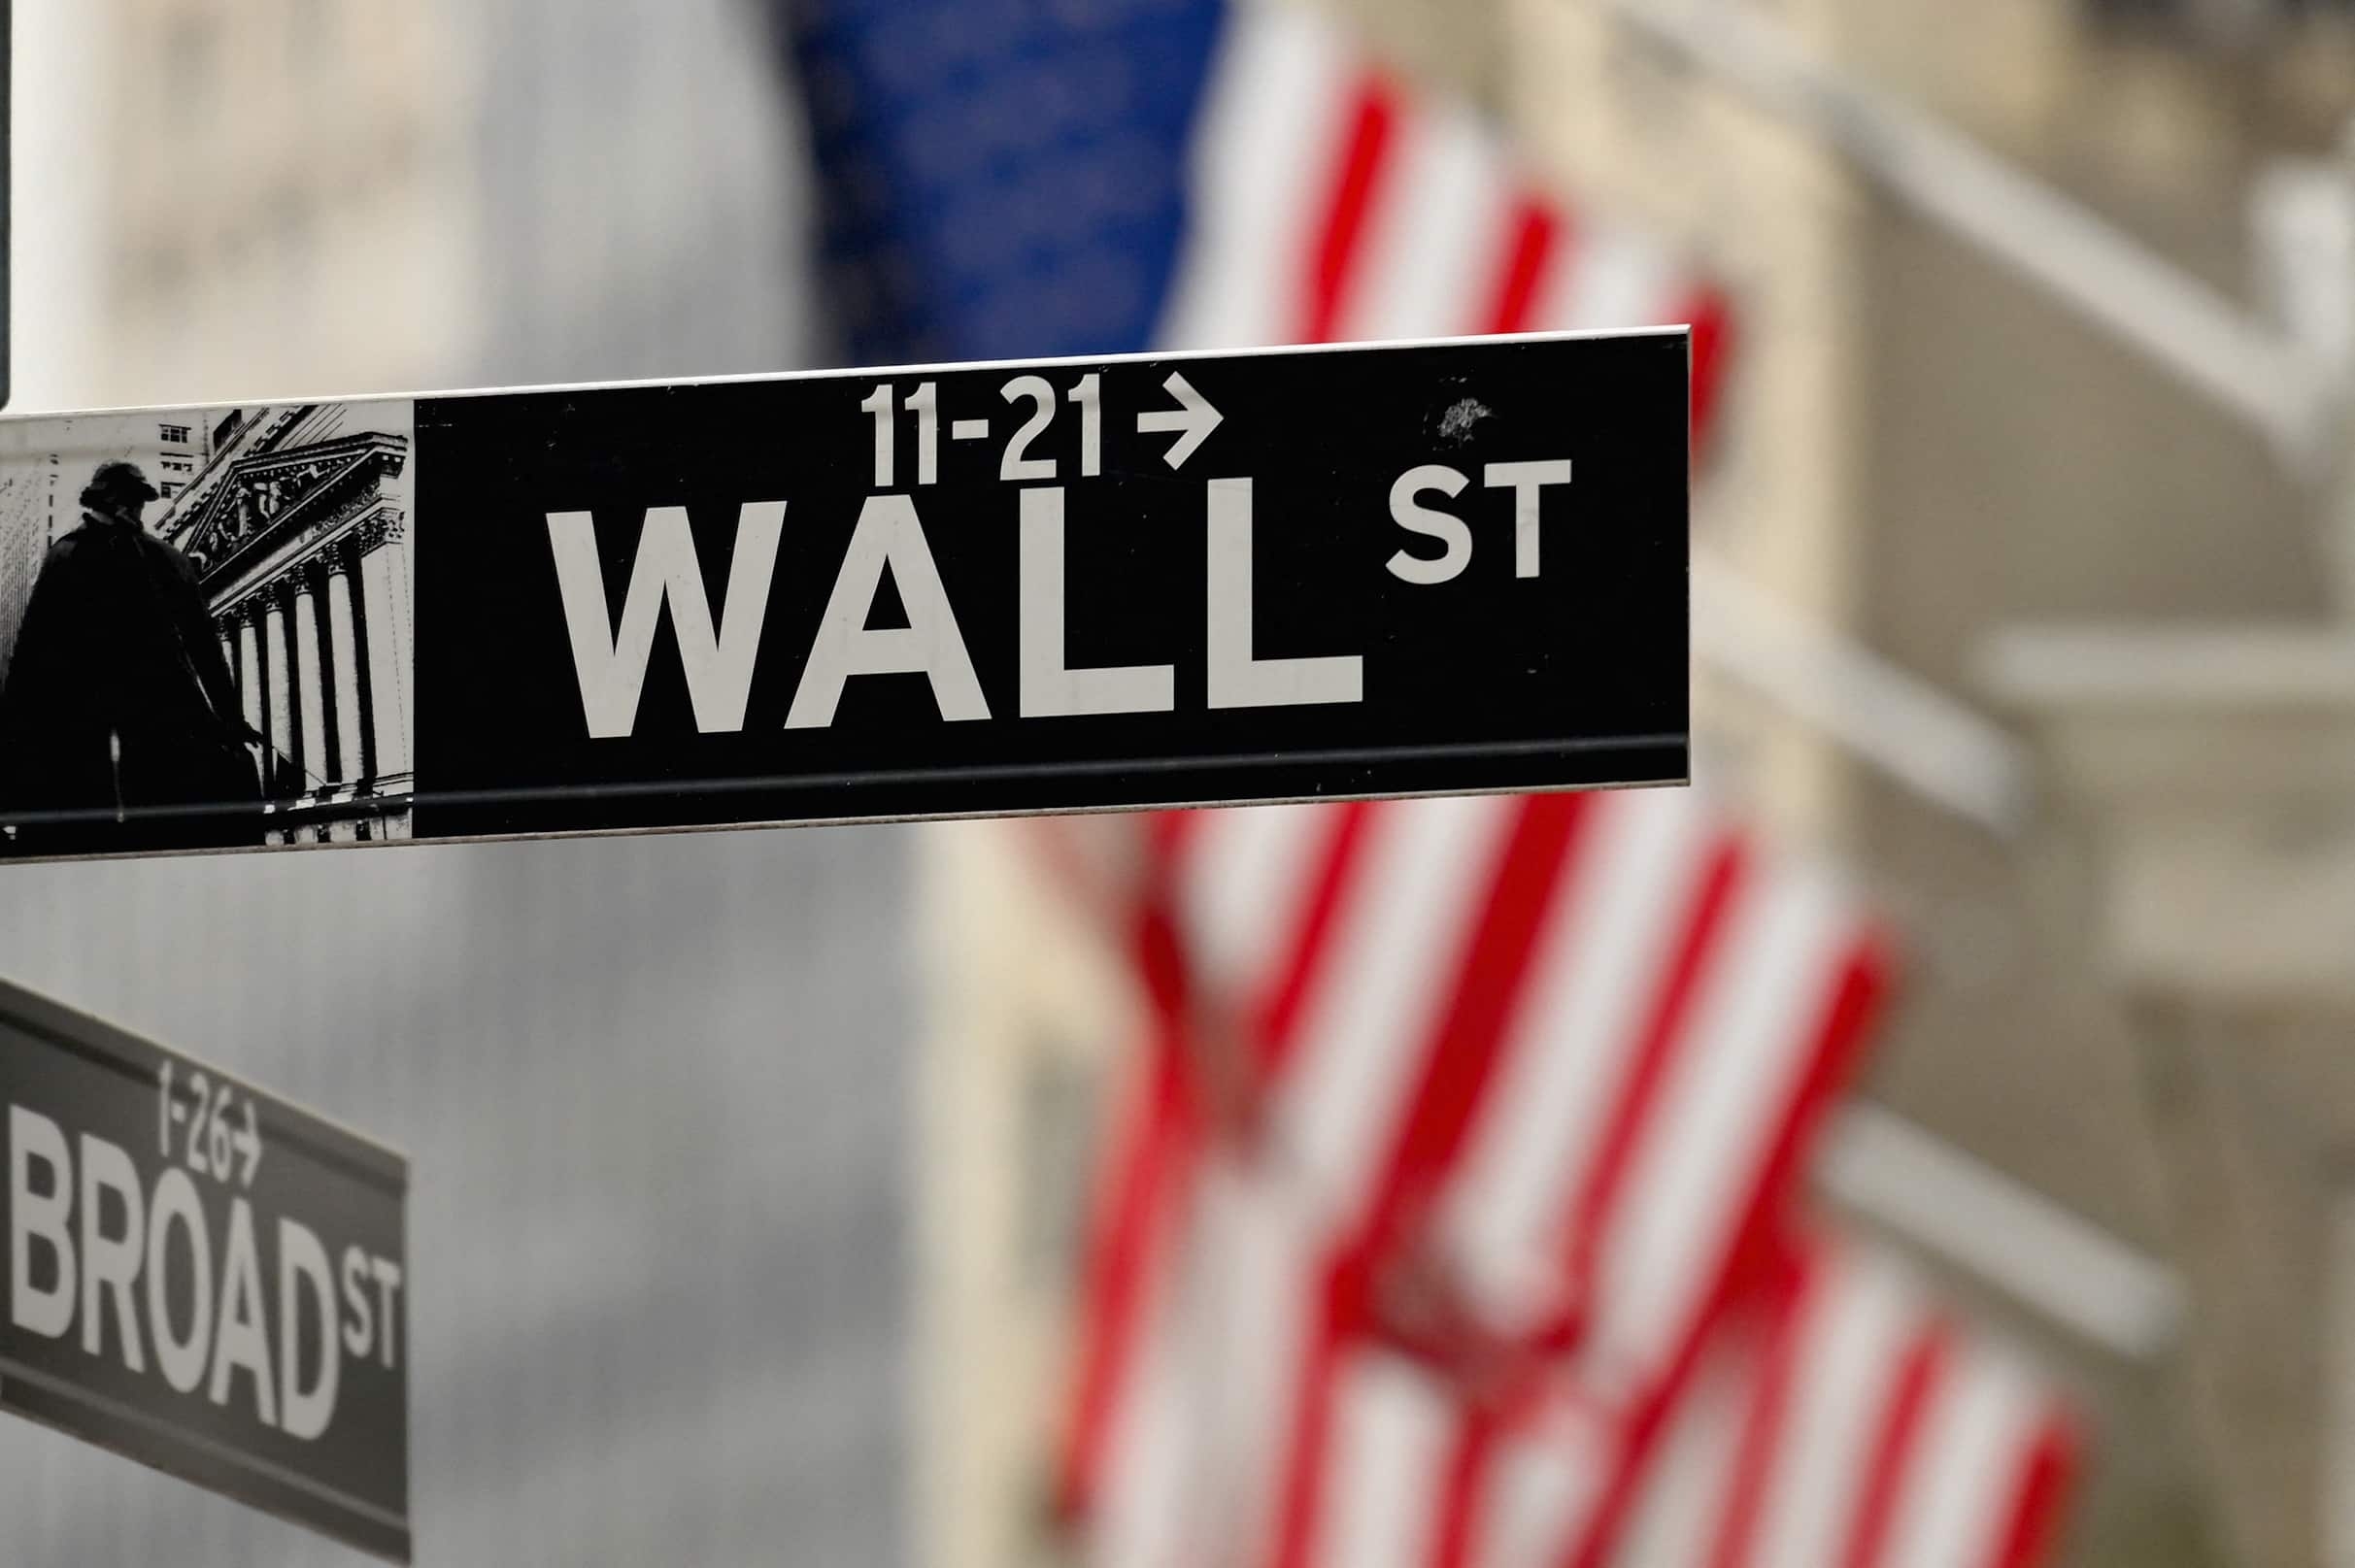 U.S. stocks fell on Wednesday, with the Dow and S&amp;P 500 snapping four-session winning streaks, on waning signs of progress for peace talks between Ukraine and Russia against a backdrop of a hawkish Federal Reserve curbing economic growth. The Dow Jones Industrial Average fell 65.38 points, or 0.19%, to 35,228.81, the S&amp;P 500 lost 29.15 points, or 0.63%, to 4,602.45 and the Nasdaq Composite dropped 177.36 points, or 1.21%, to 14,442.28.